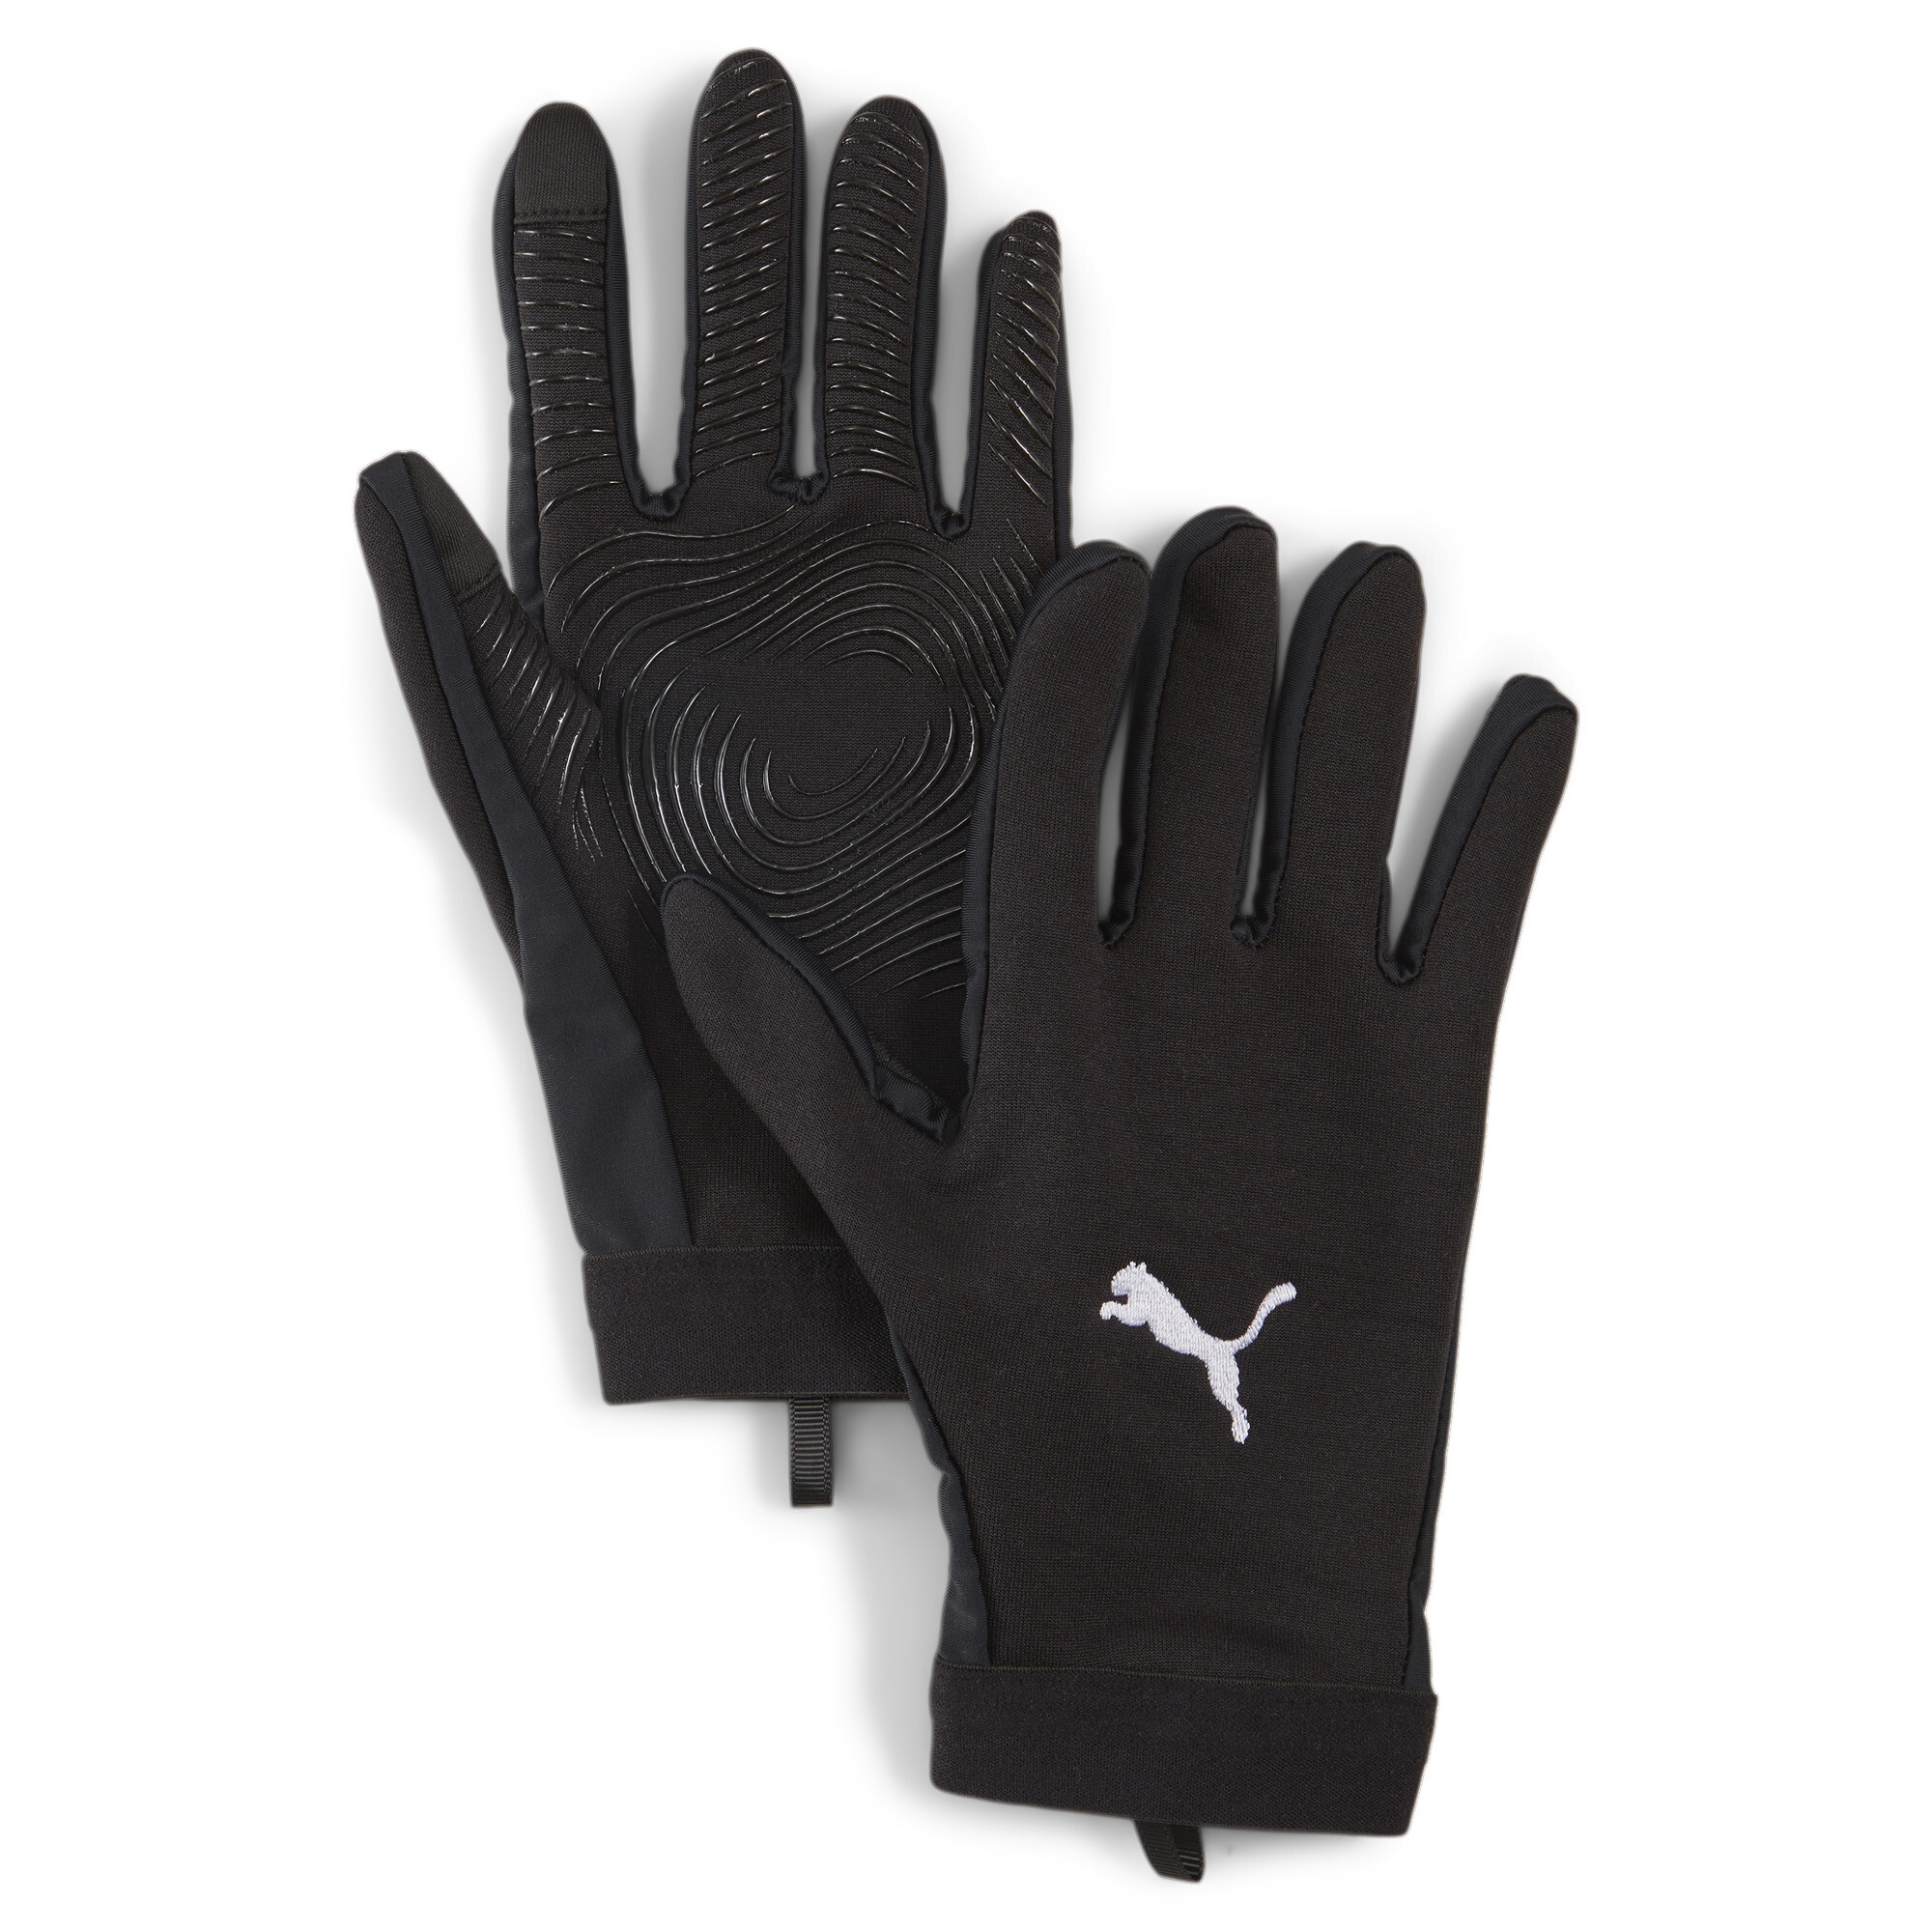 Puma Individual WINTERIZED Football Gloves, Black, Size S, Accessories